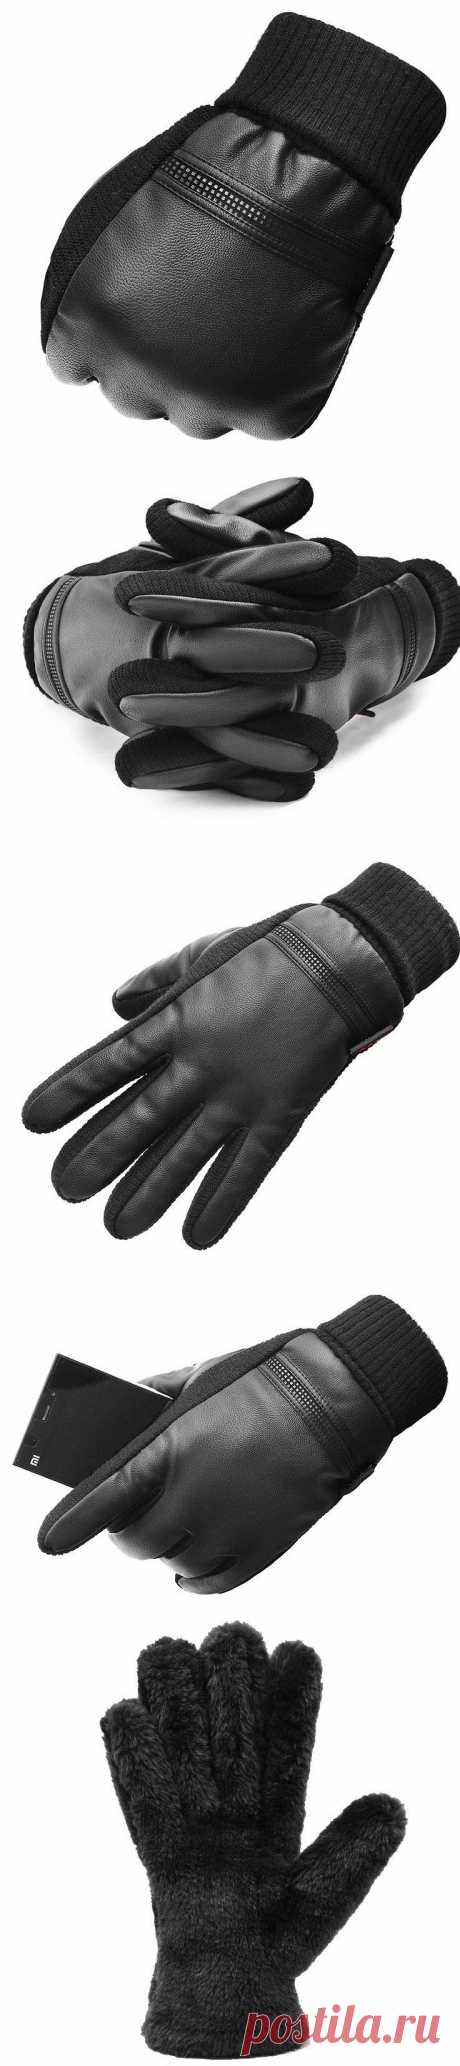 Aliexpress.com : Buy New brand 2015 Fashion clothes accessories Men Black winter gloves driving Warm Leather Mittens guanti pelle uomo from Reliable clothes strawberry suppliers on The perfect pair | Alibaba Group